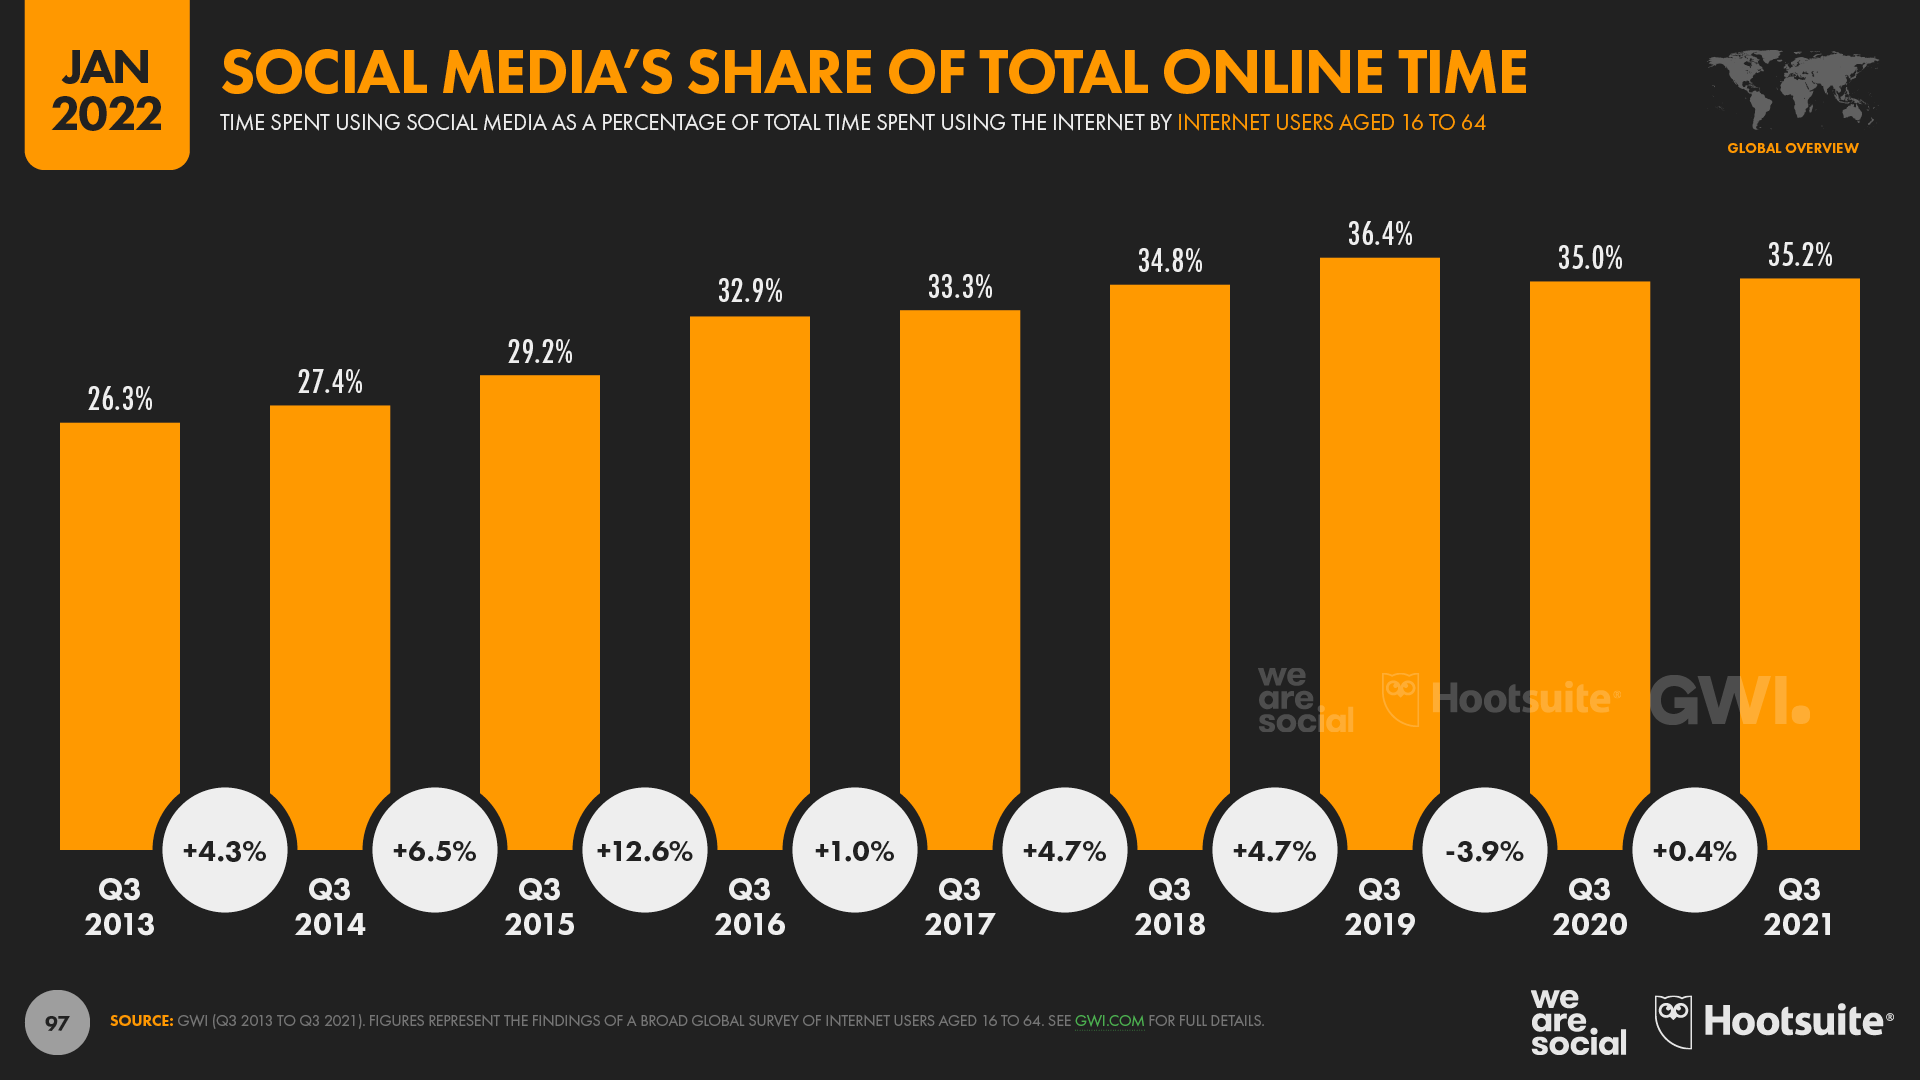 chart showing social media's share of total online time